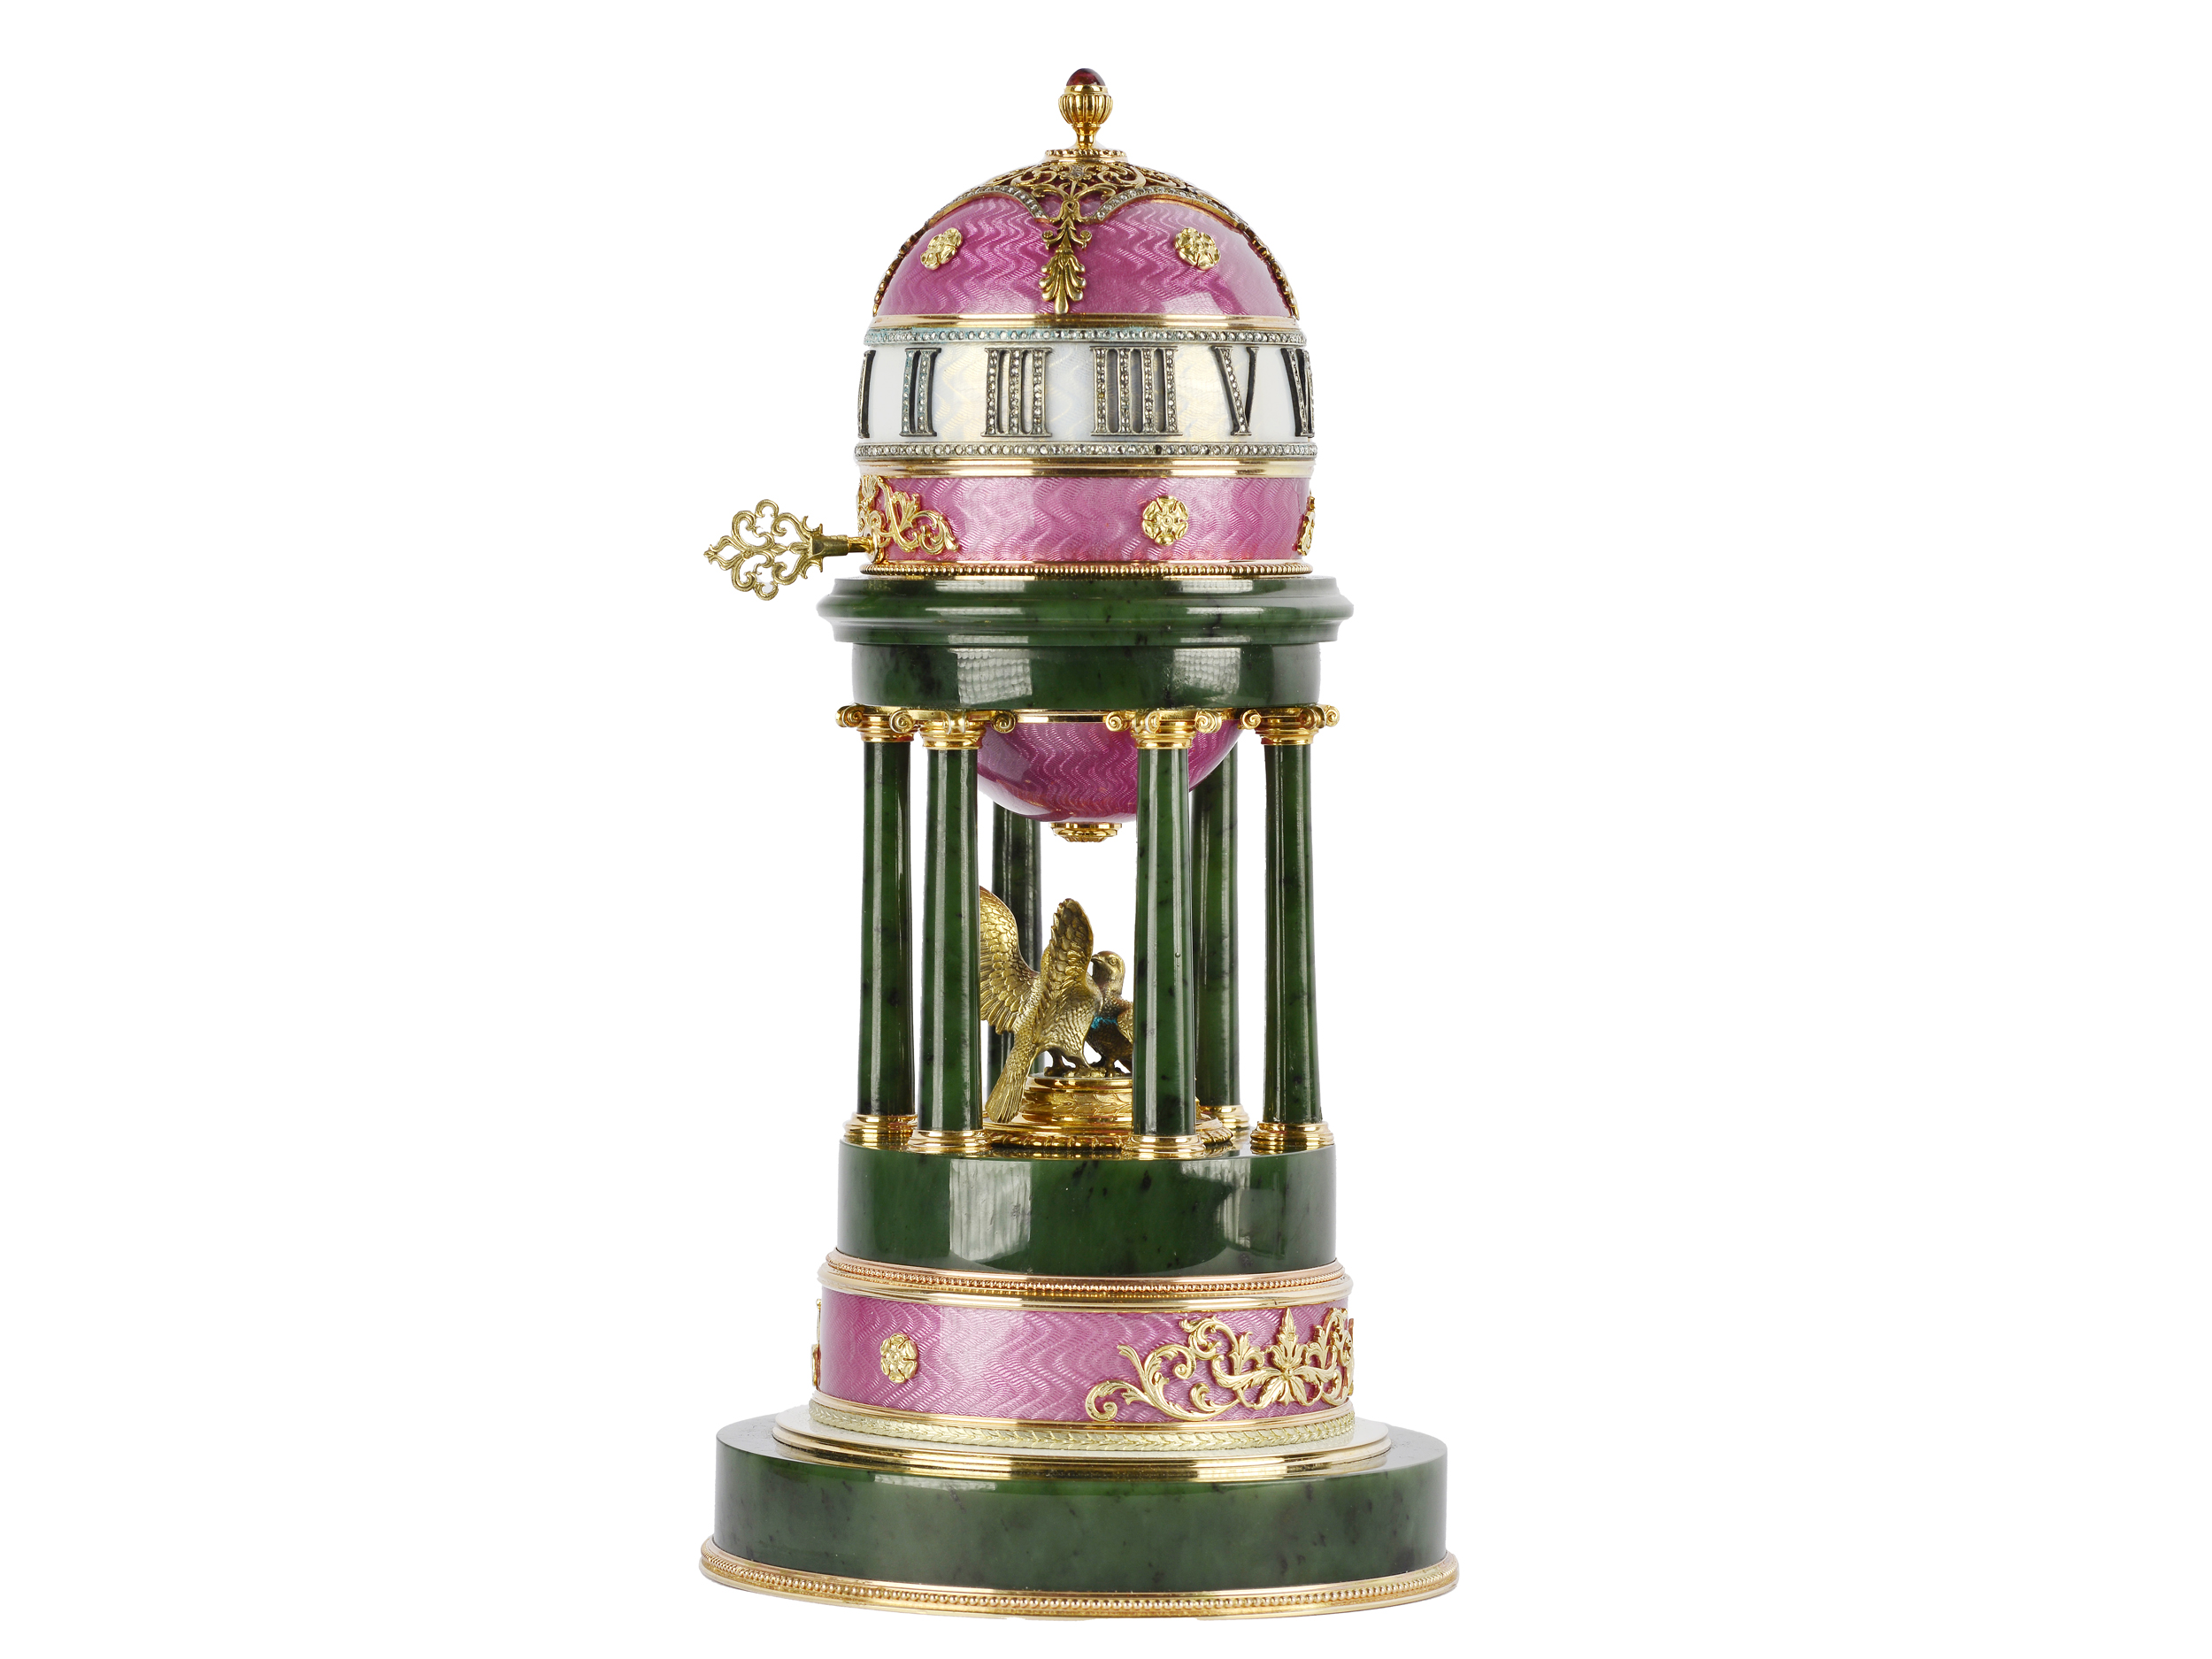 A highly significant unique colonnade clock in the style of Peter Carl Fabergé, Saint Petersburg 184 - Image 2 of 17